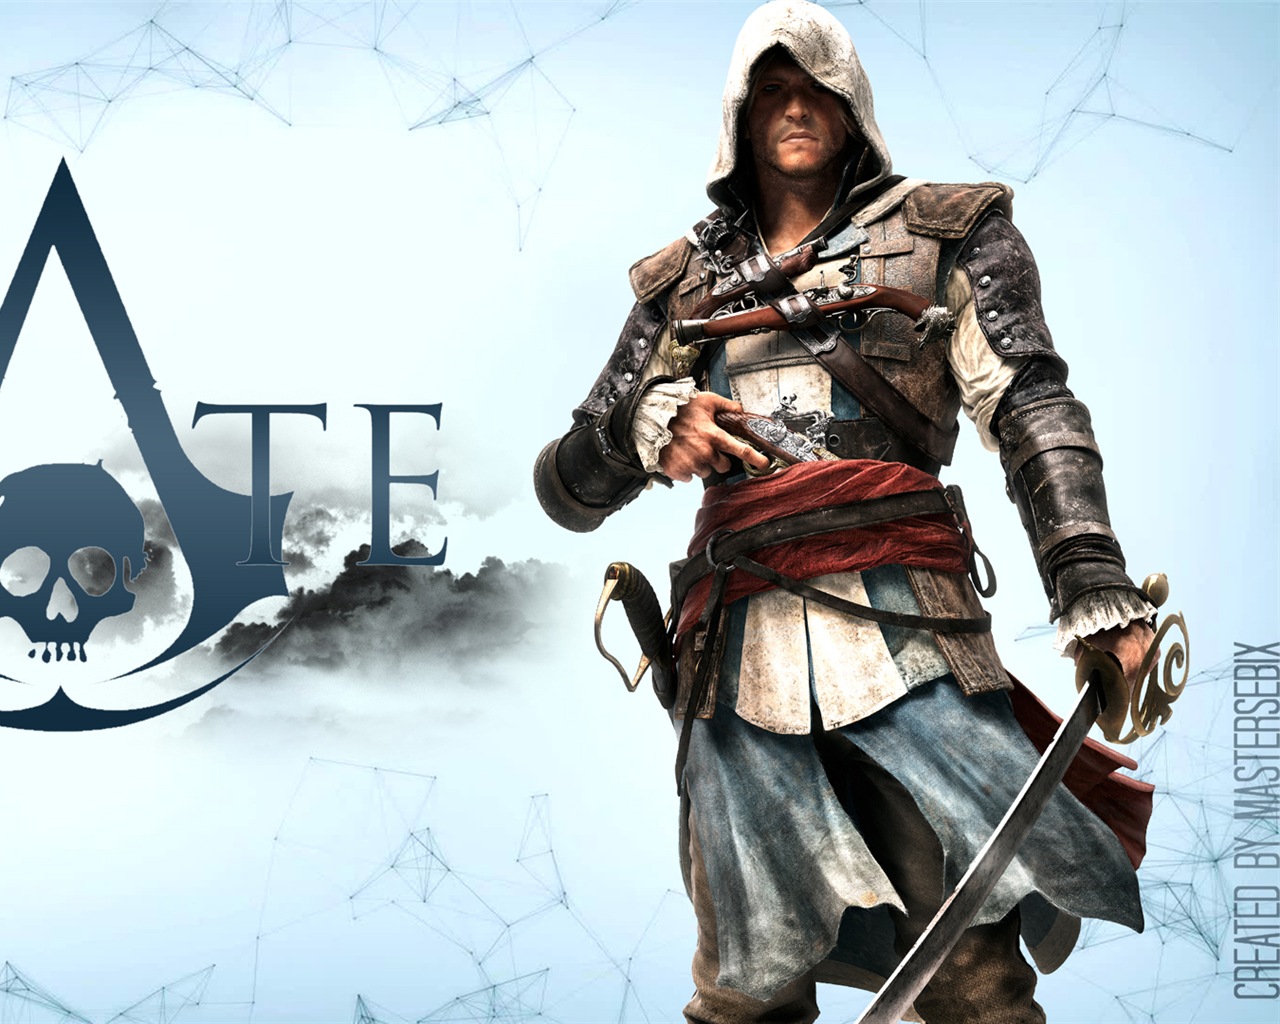 Creed IV Assassin: Black Flag HD wallpapers #18 - 1280x1024